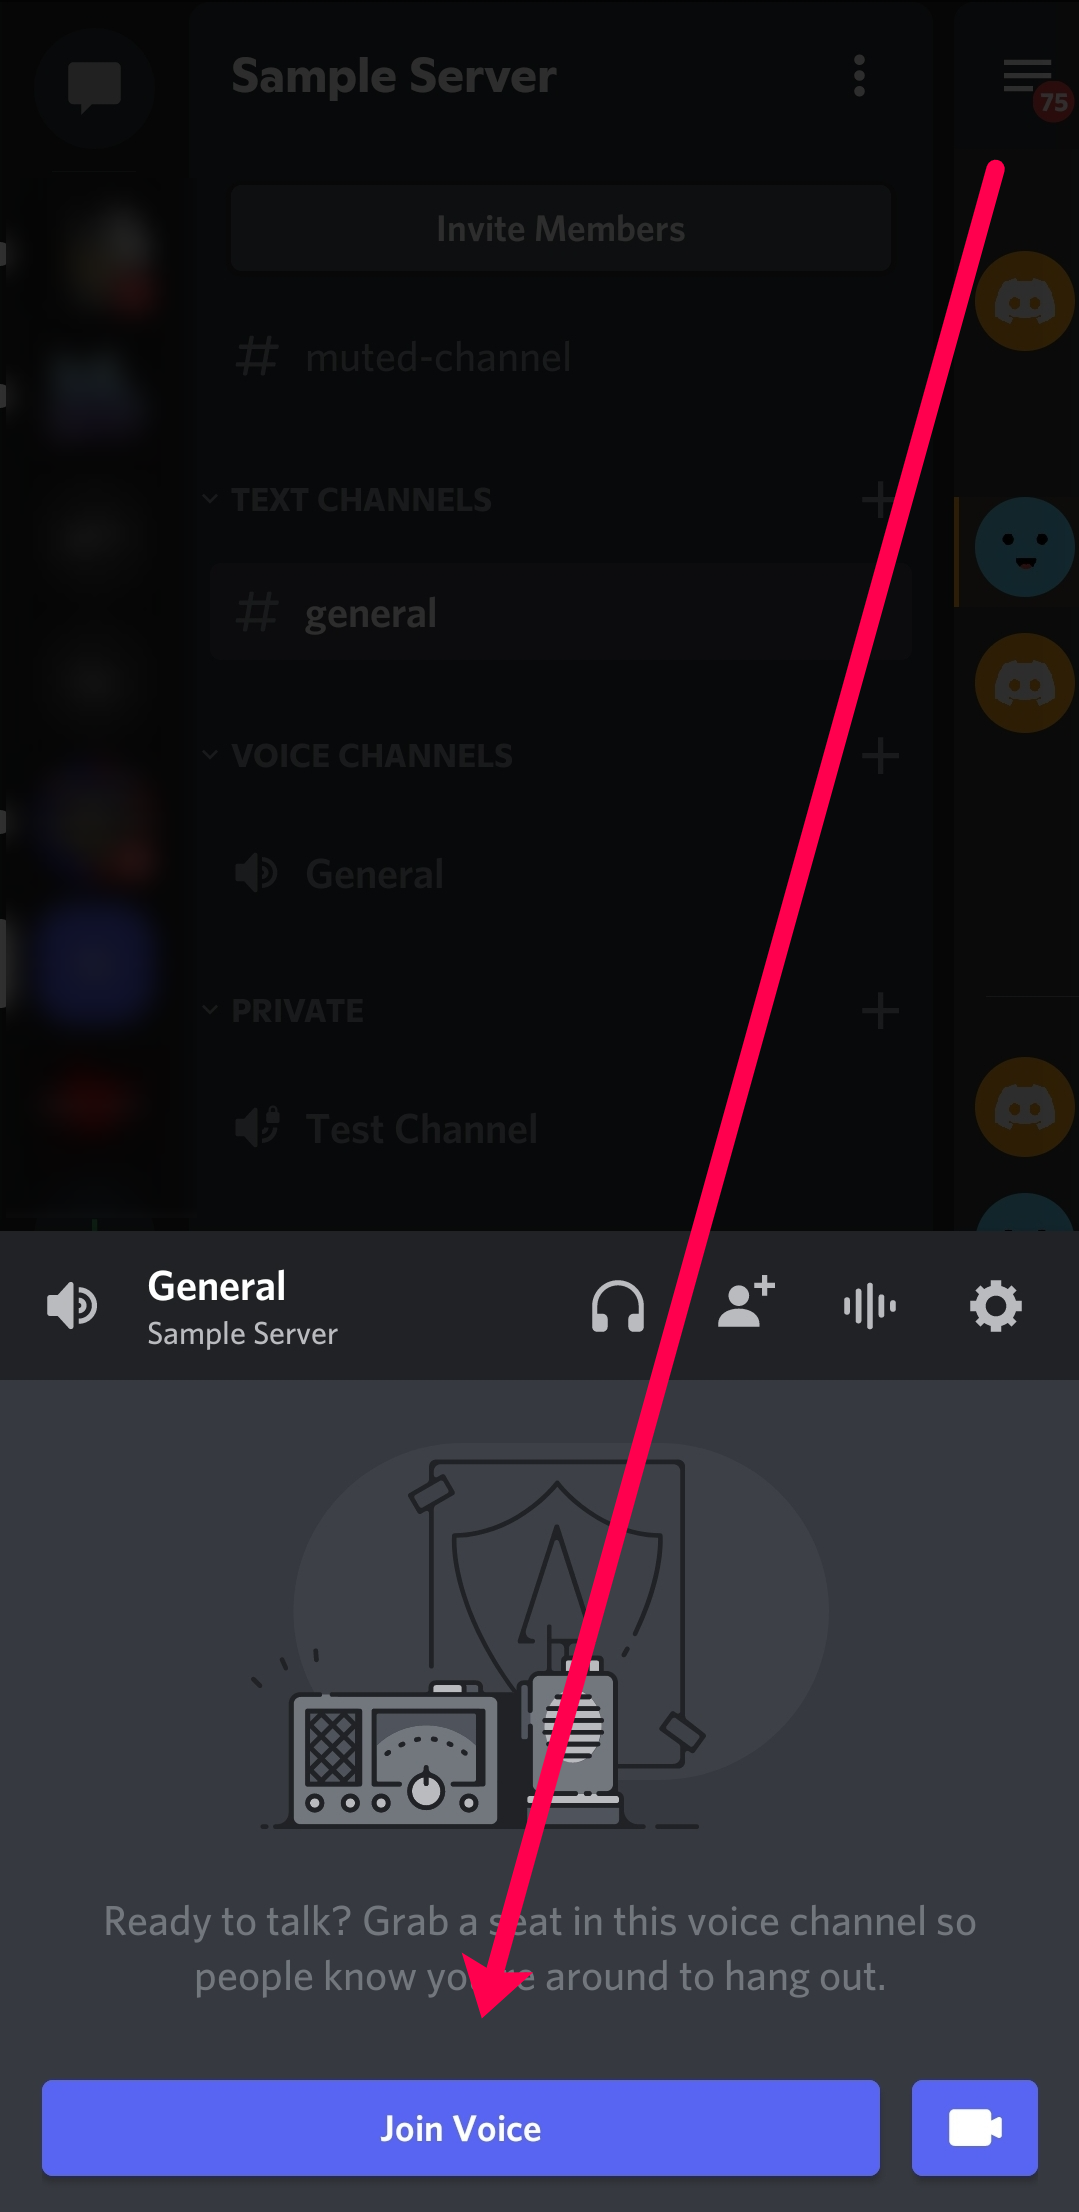 How to Screen Share on Discord